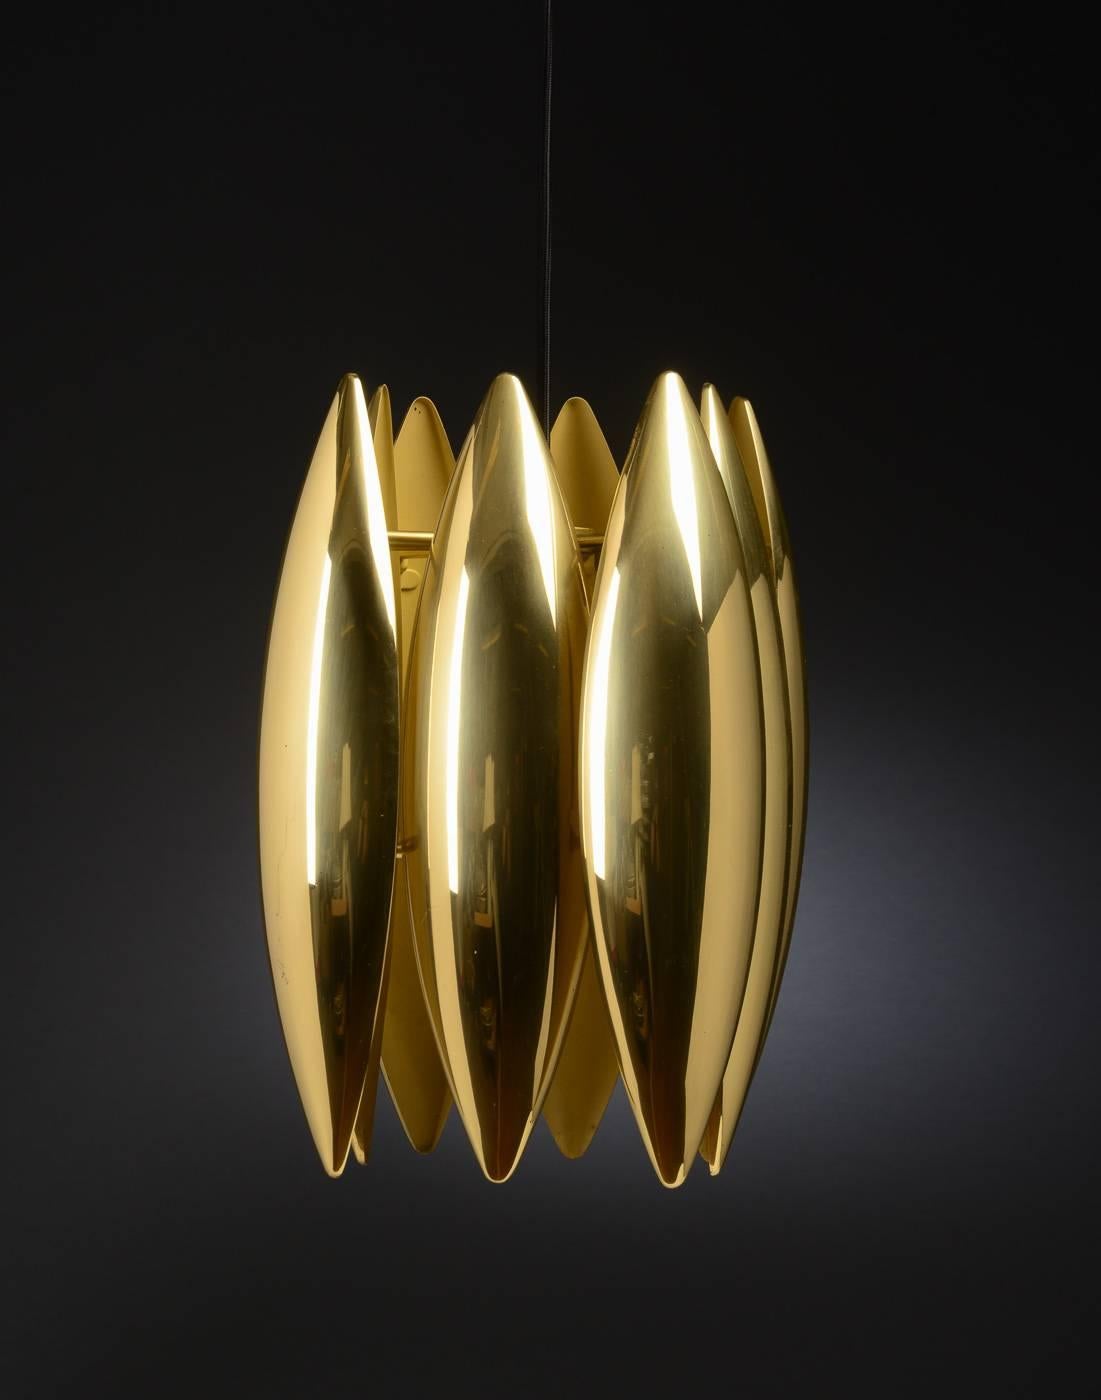 A Danish pendant with screens in brass designed by Jo Hammerborg for Fog and Mørup in the 1970s.
Excellent condition.